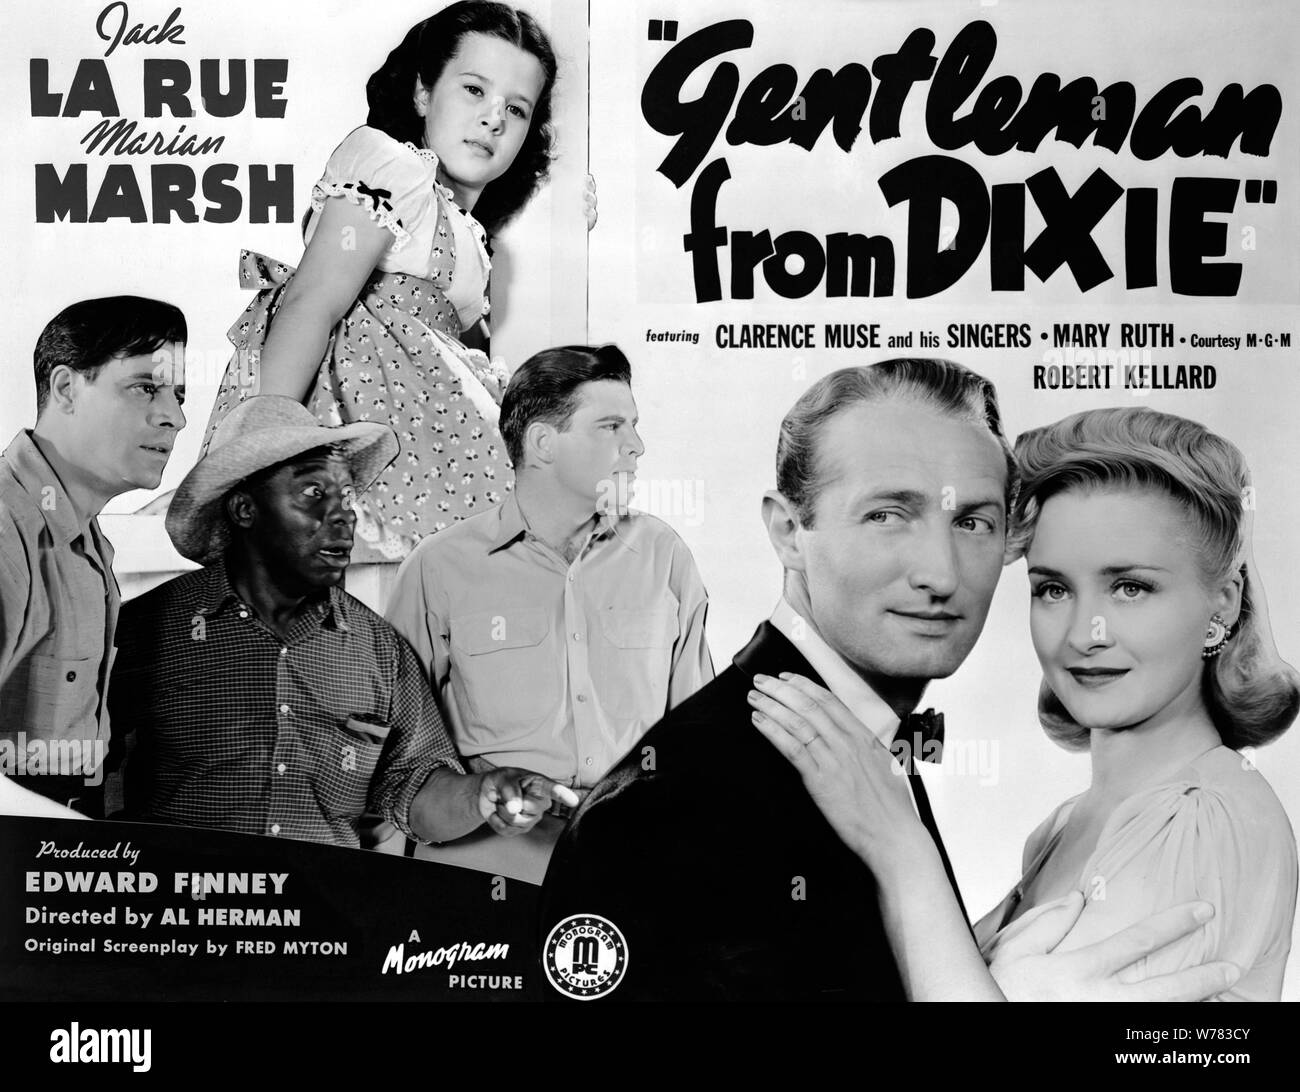 MOVIE POSTER, GENTLEMAN FROM DIXIE, 1941 Stock Photo